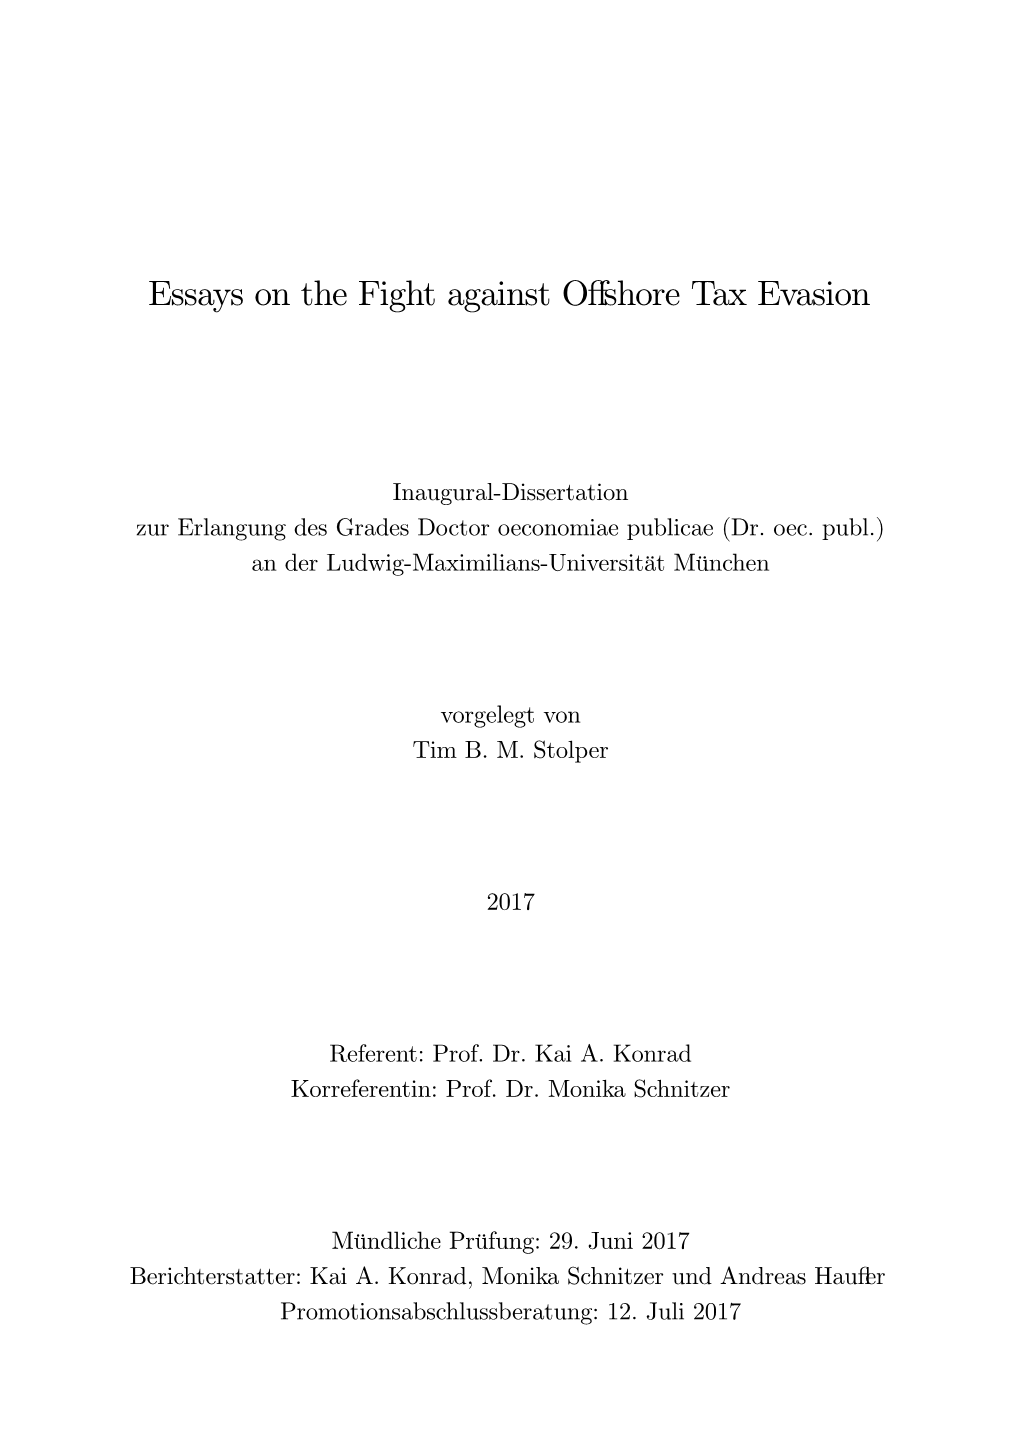 Essays on the Fight Against Offshore Tax Evasion